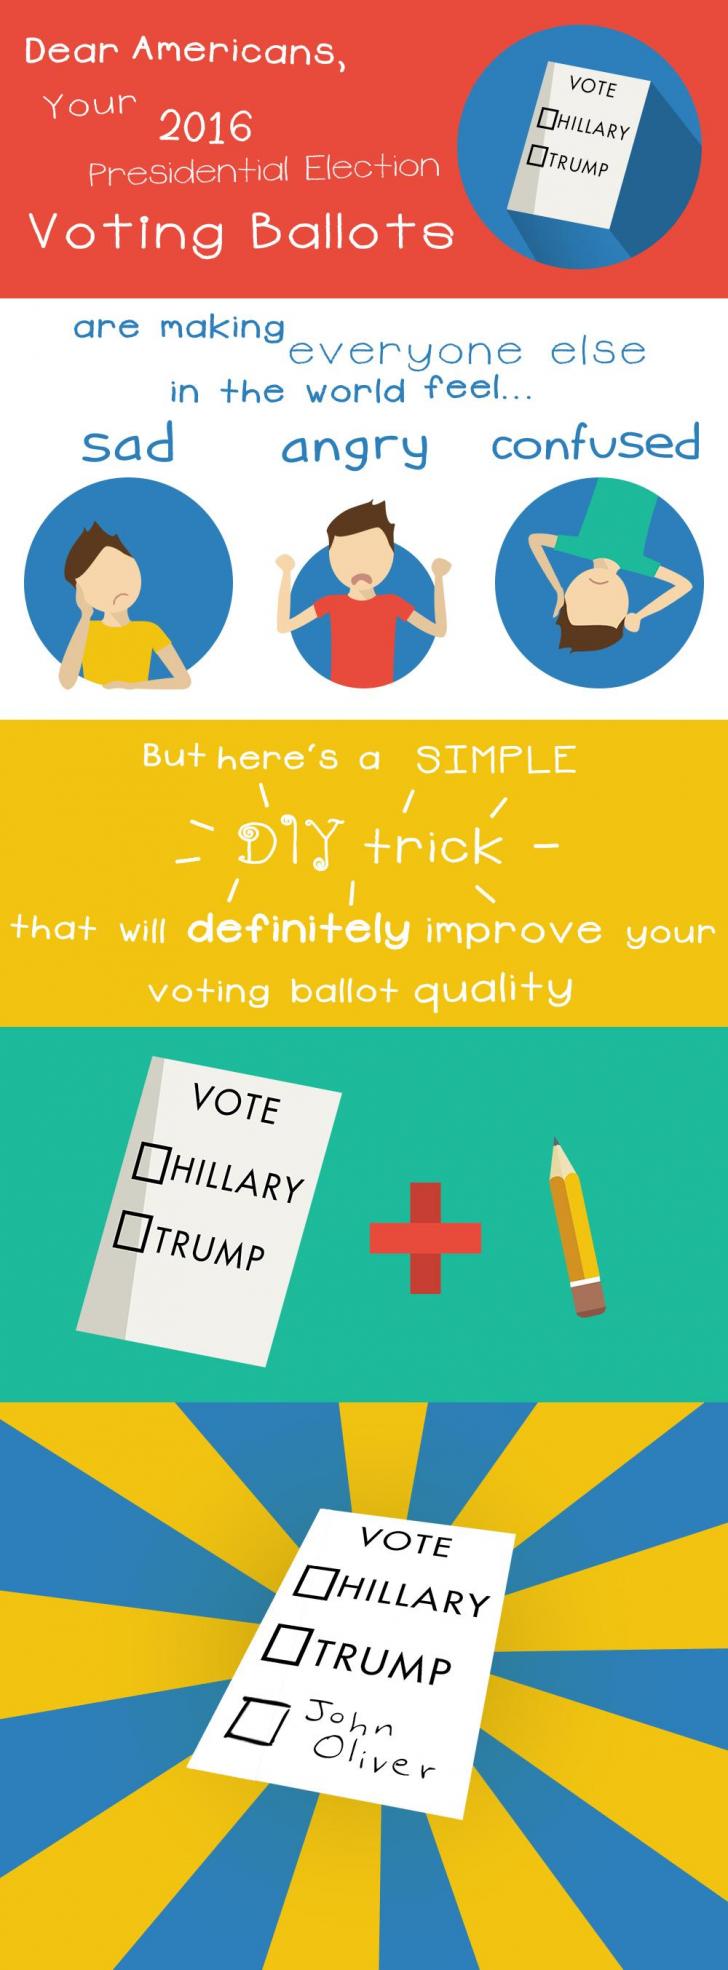 DIY Election Hack! Try it out at your next election!